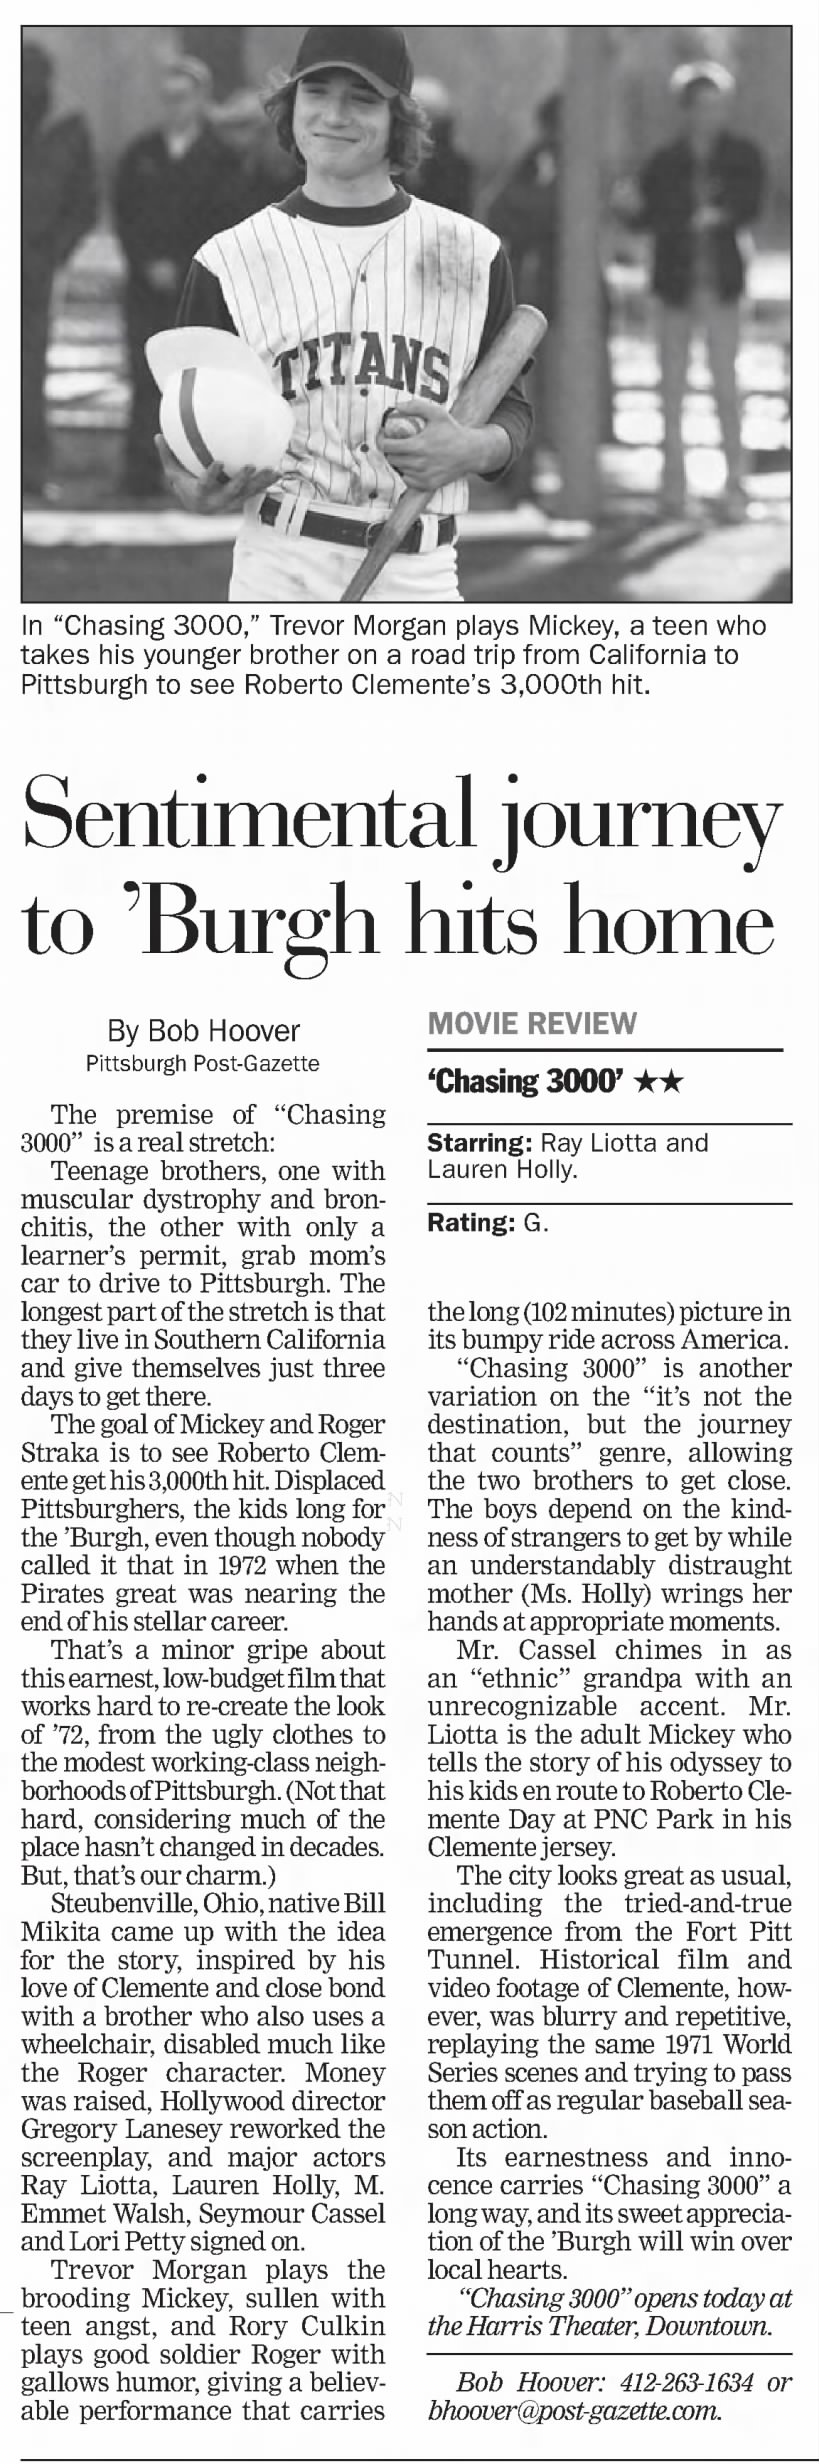 Sentimental journey to 'Burgh hits home